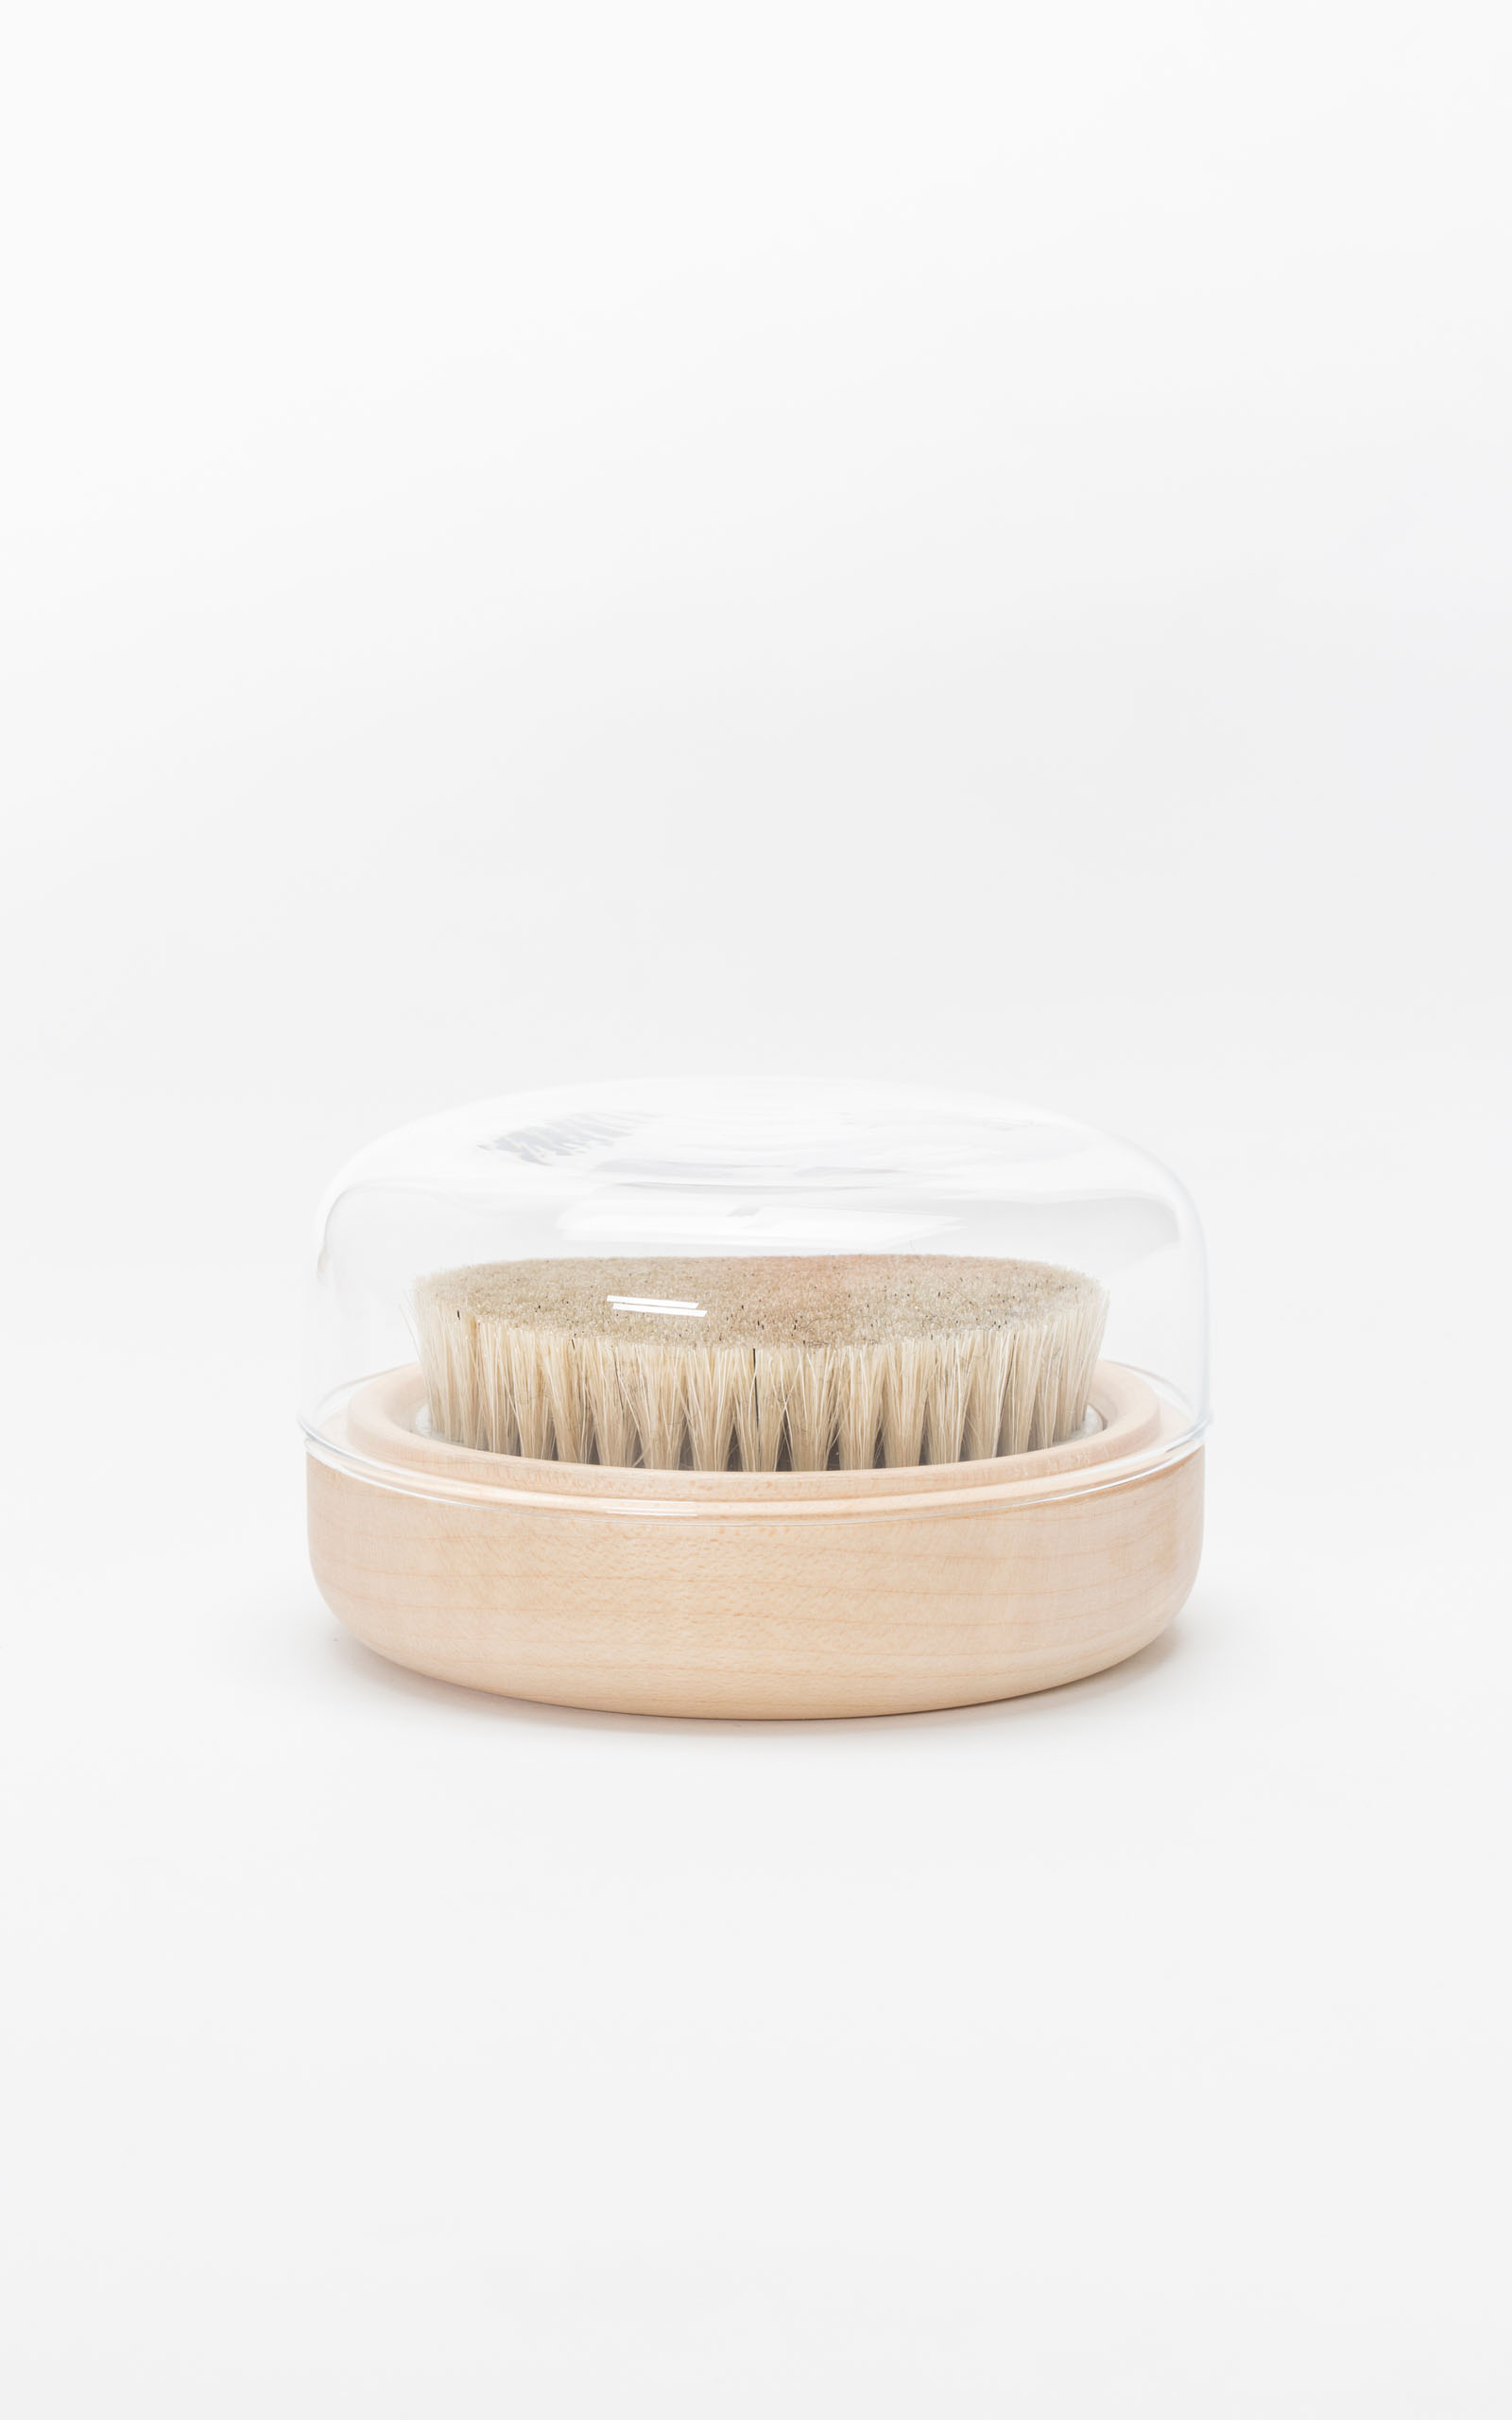 A clothing brush with a minimalistic glass top in front of a white backdrop.